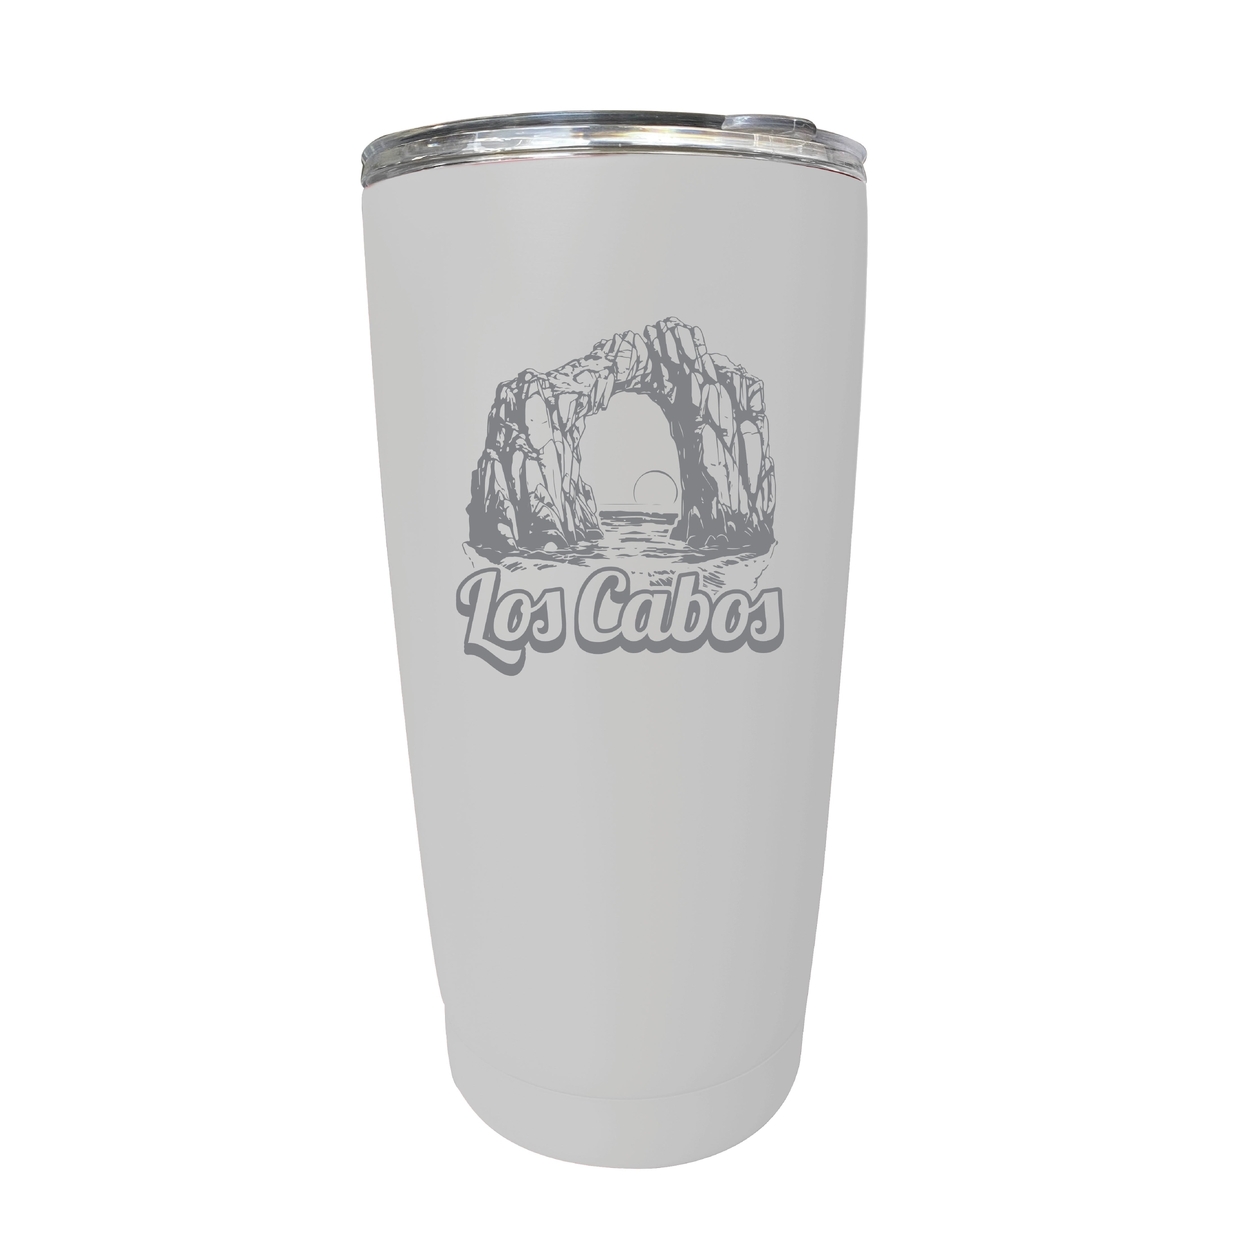 Los Cabos Mexico Souvenir 16 Oz Engraved Stainless Steel Insulated Tumbler - White,,2-Pack